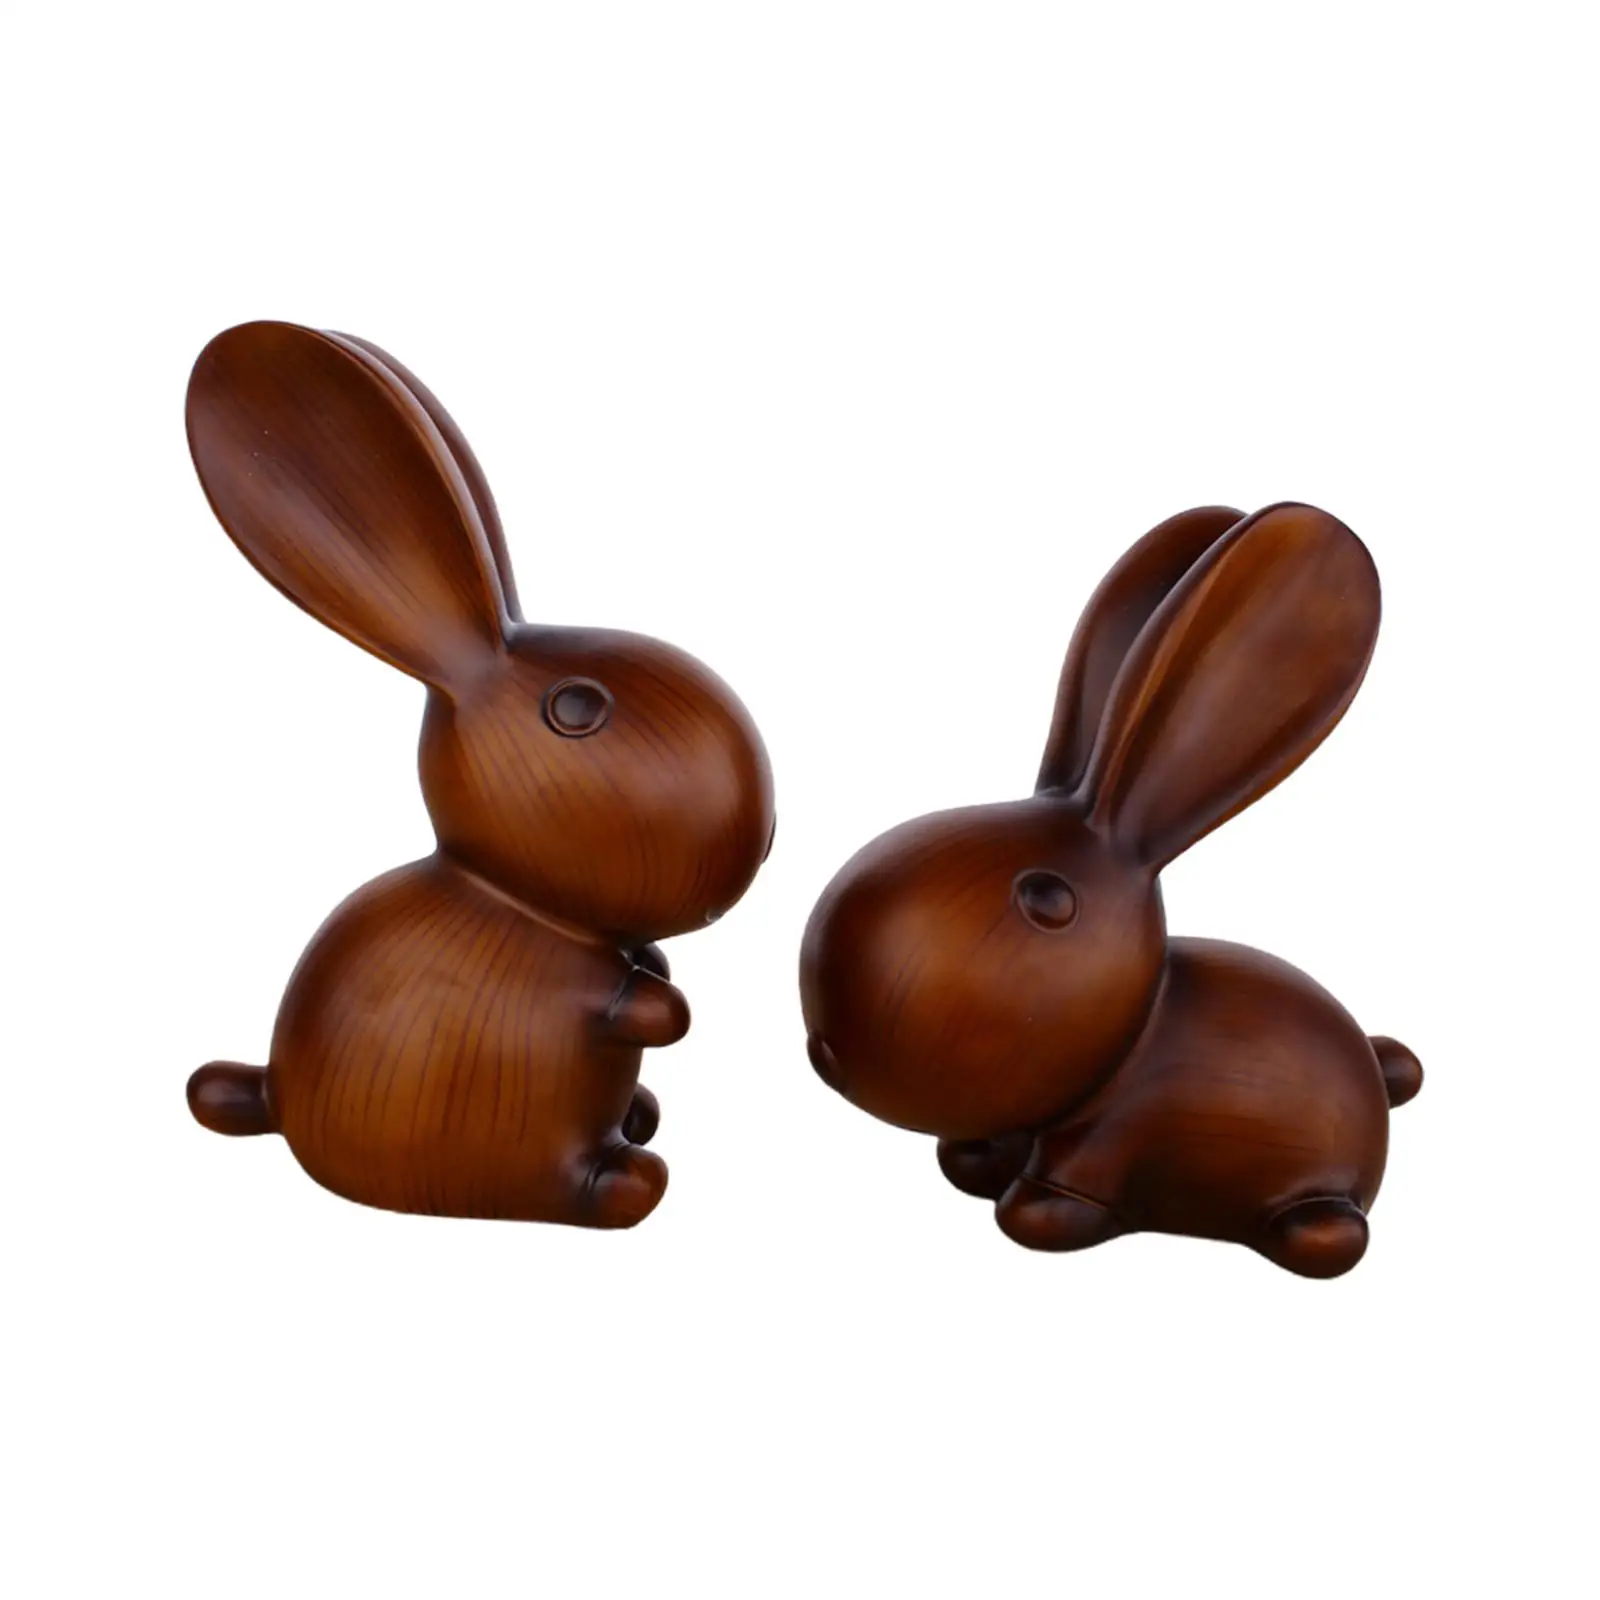 

2x Bunny Resin Sculpture Animal Craft Art Garden Statue Spring Easter Rabbit Figurines for Store Table Porch Holiday Decor